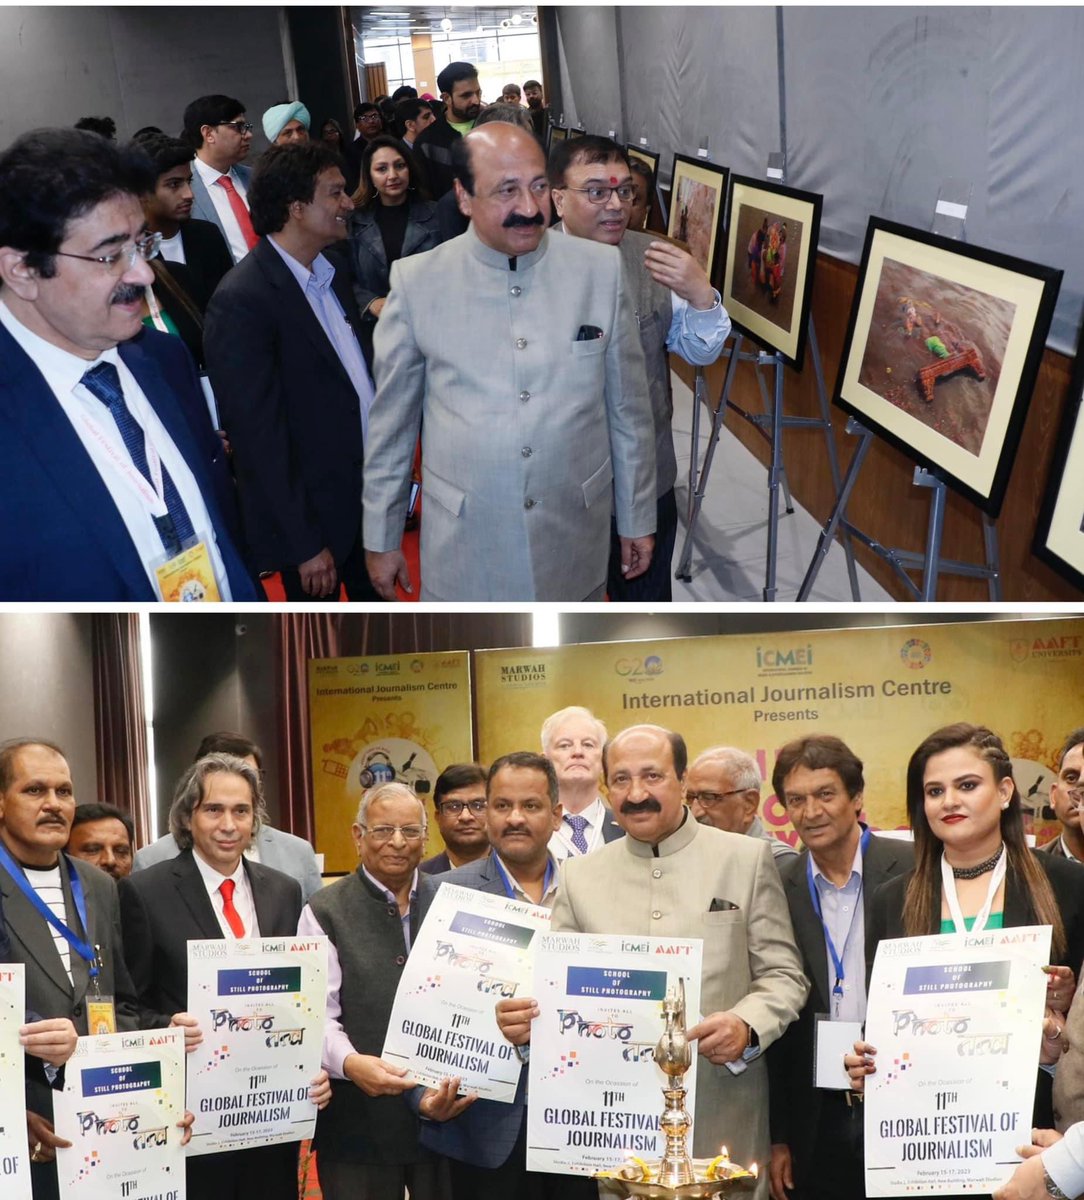 Exhibition of Still Photography was inaugurated during 11th Global Festival of Journalism Noida 2023- by AAFT School of Still Photography #exhibition #stillphotography  #inaugrated #11thEdition #global #festival #journalisn #noida2023 #Aaft  #schoolofstillphotography #icmei